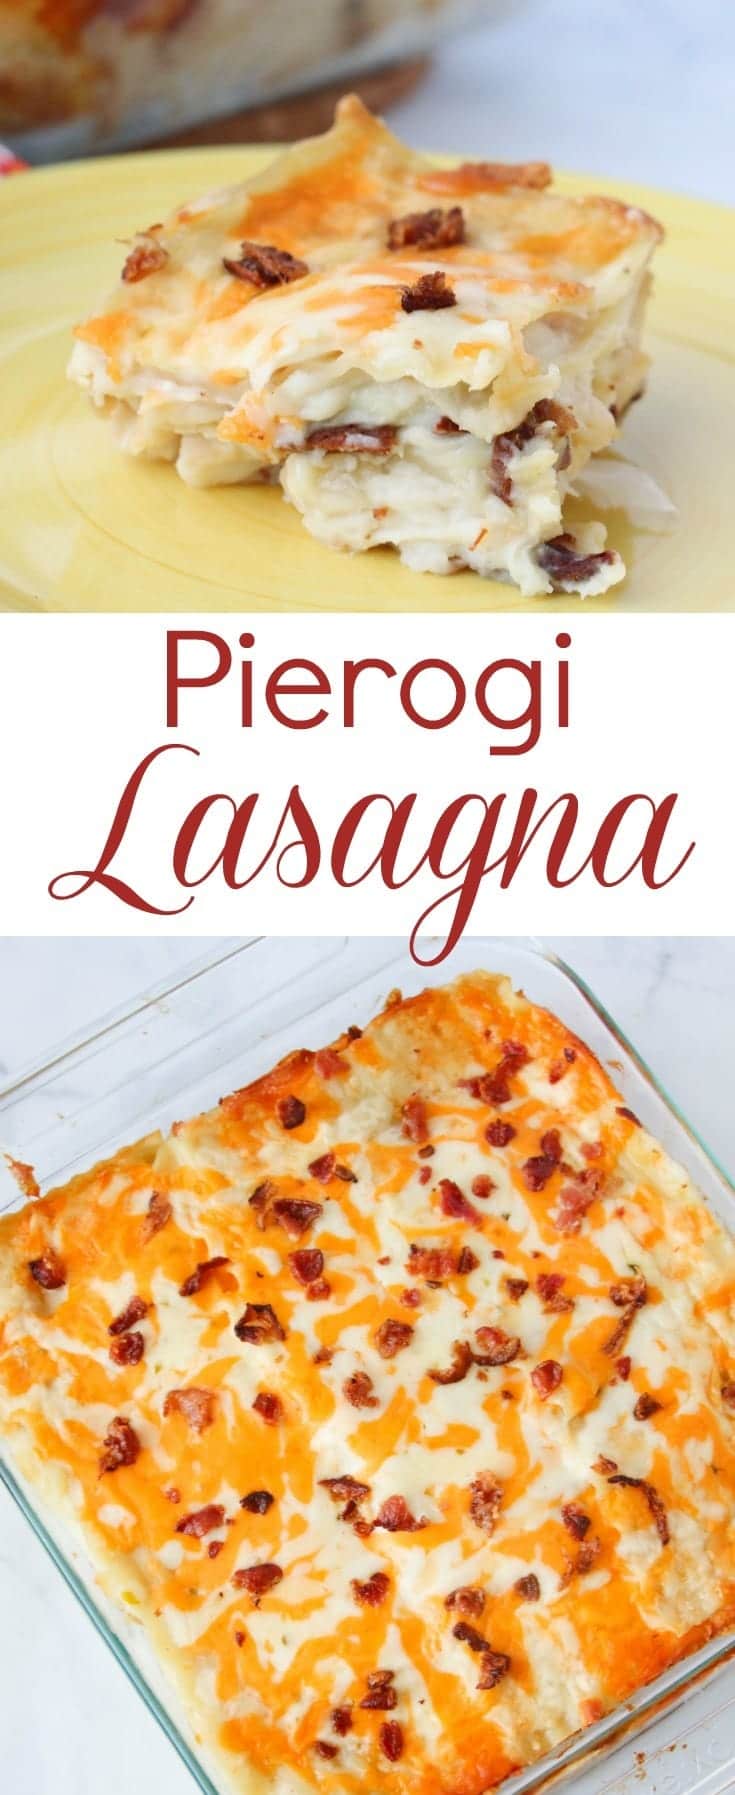 This pierogi lasagna is an innovative twist on a familiar dish. Loaded with mashed potatoes, sour cream, cream cheese and bacon, it's only resemblance to traditional lasagna is the noodles! #lasagna #pierogi #dinnerrecipe via @wondermomwannab